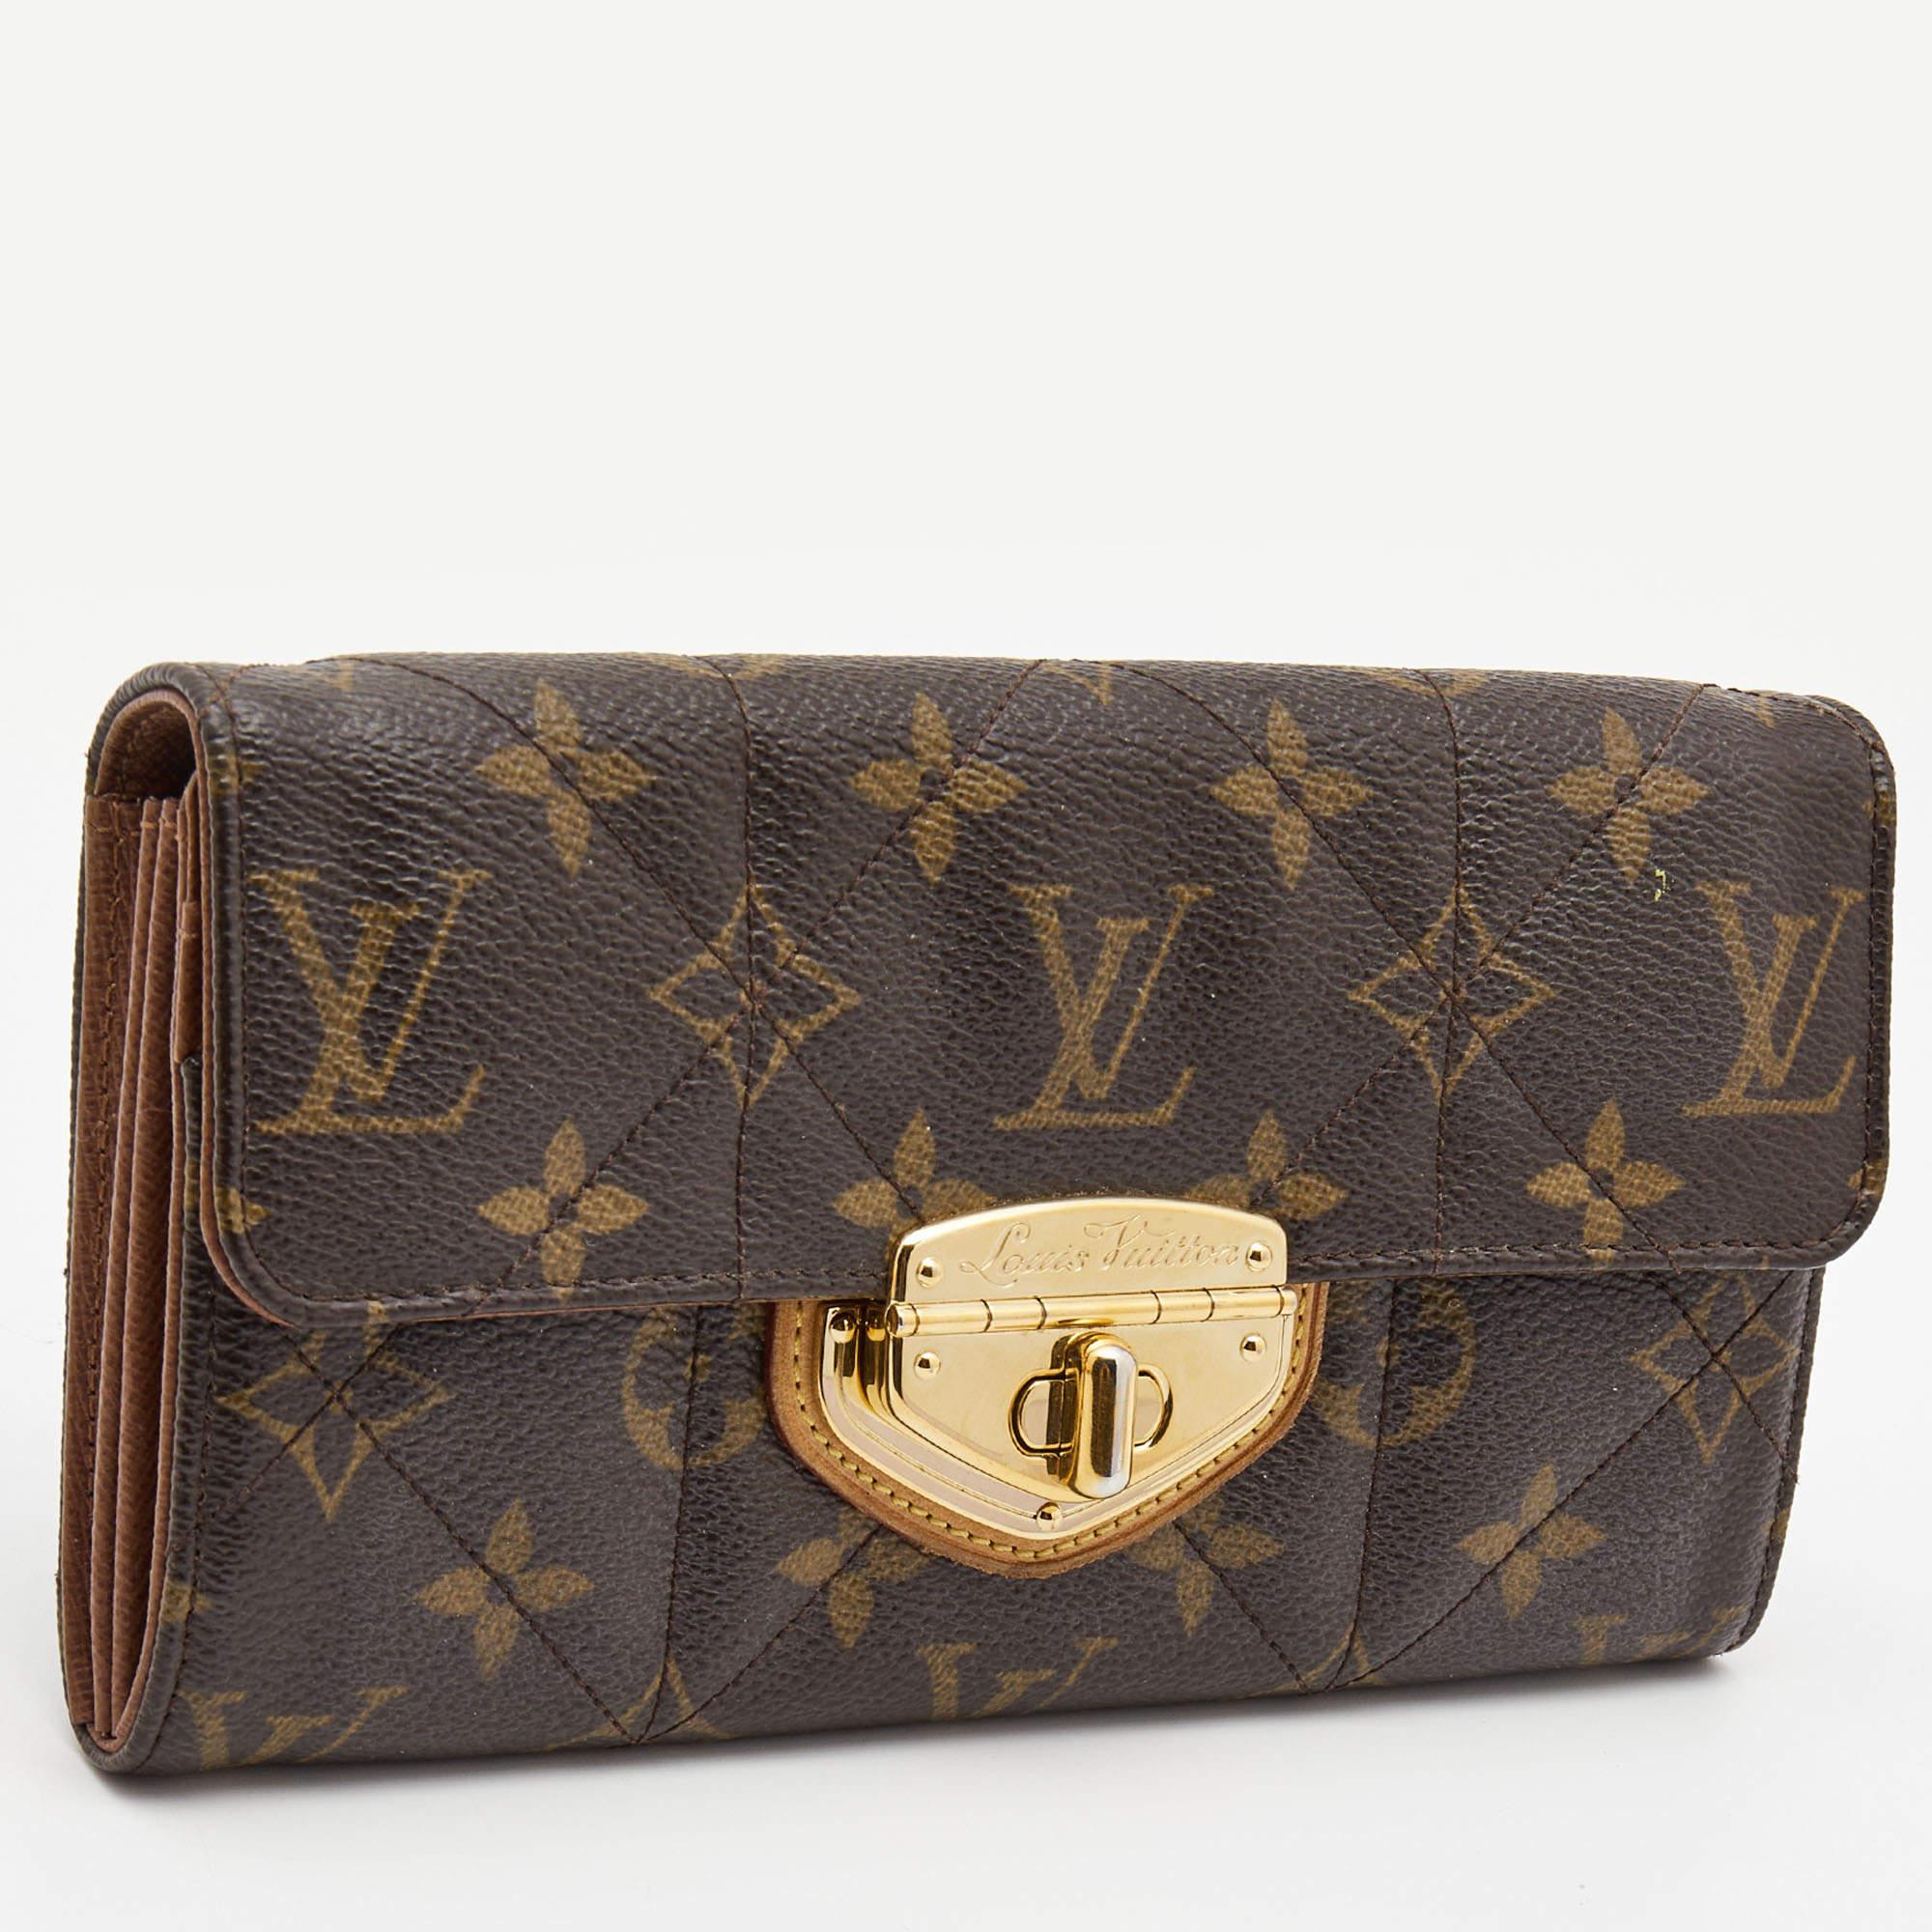 Etoile Sarah is a popular classic wallet by Louis Vuitton. Made from signature Monogram canvas the turn lock closure opens to an expanse with multiple card slots, open compartments to arrange currency and a zip coin pocket. Perfect in size, it can